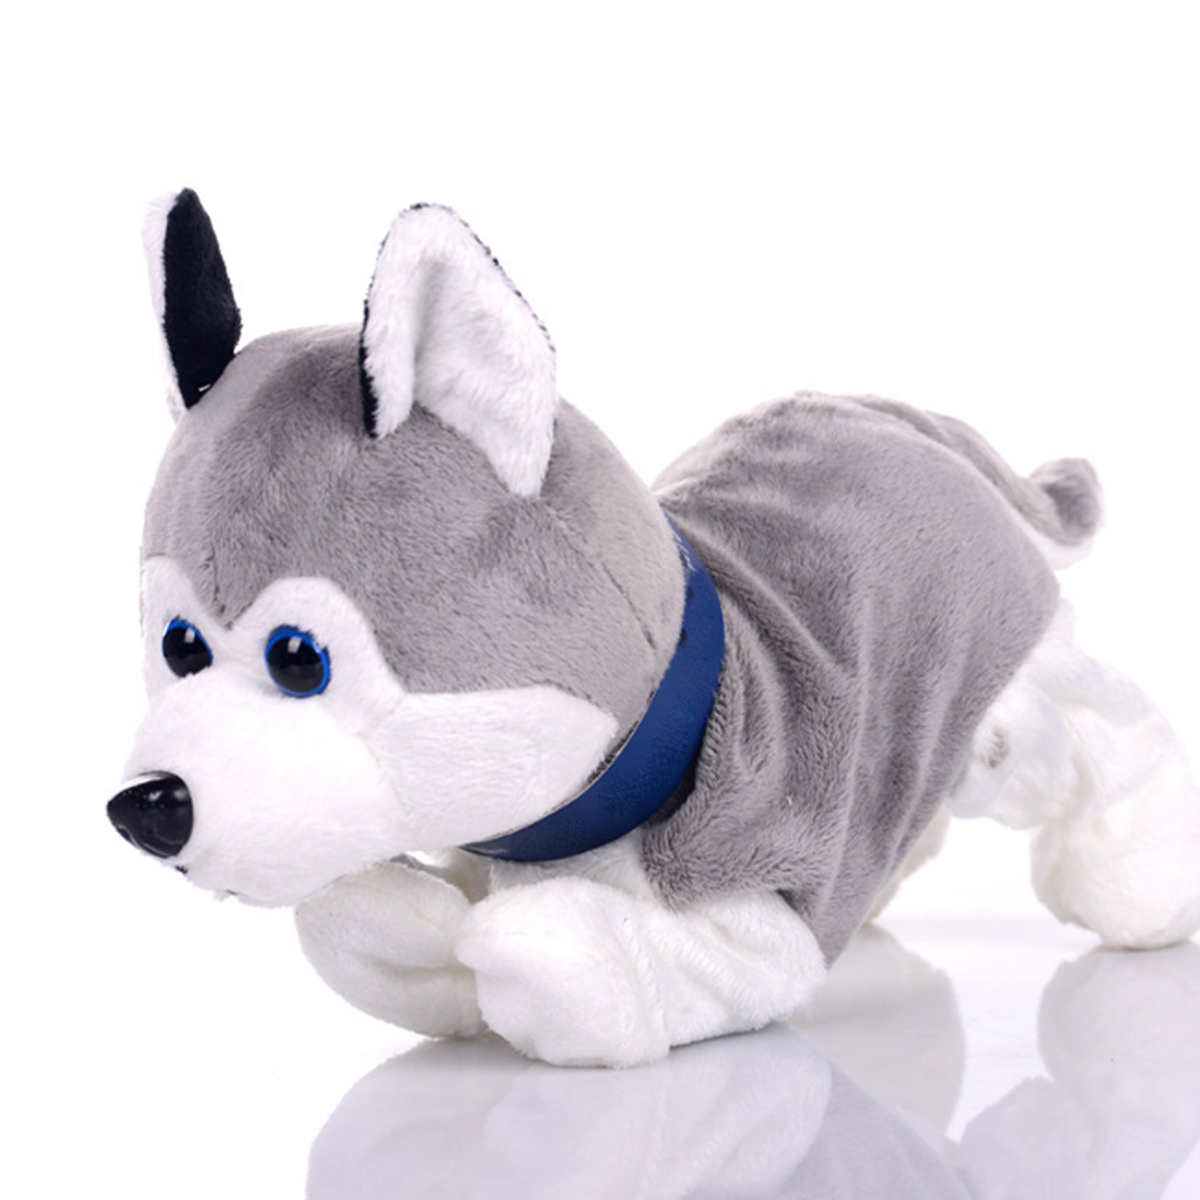 Interactive-Dog-Electronic-Pet-Stuffed-Plush-Toy-Control-Walk-Sound-Husky-Reacts-Touch-1414452-9